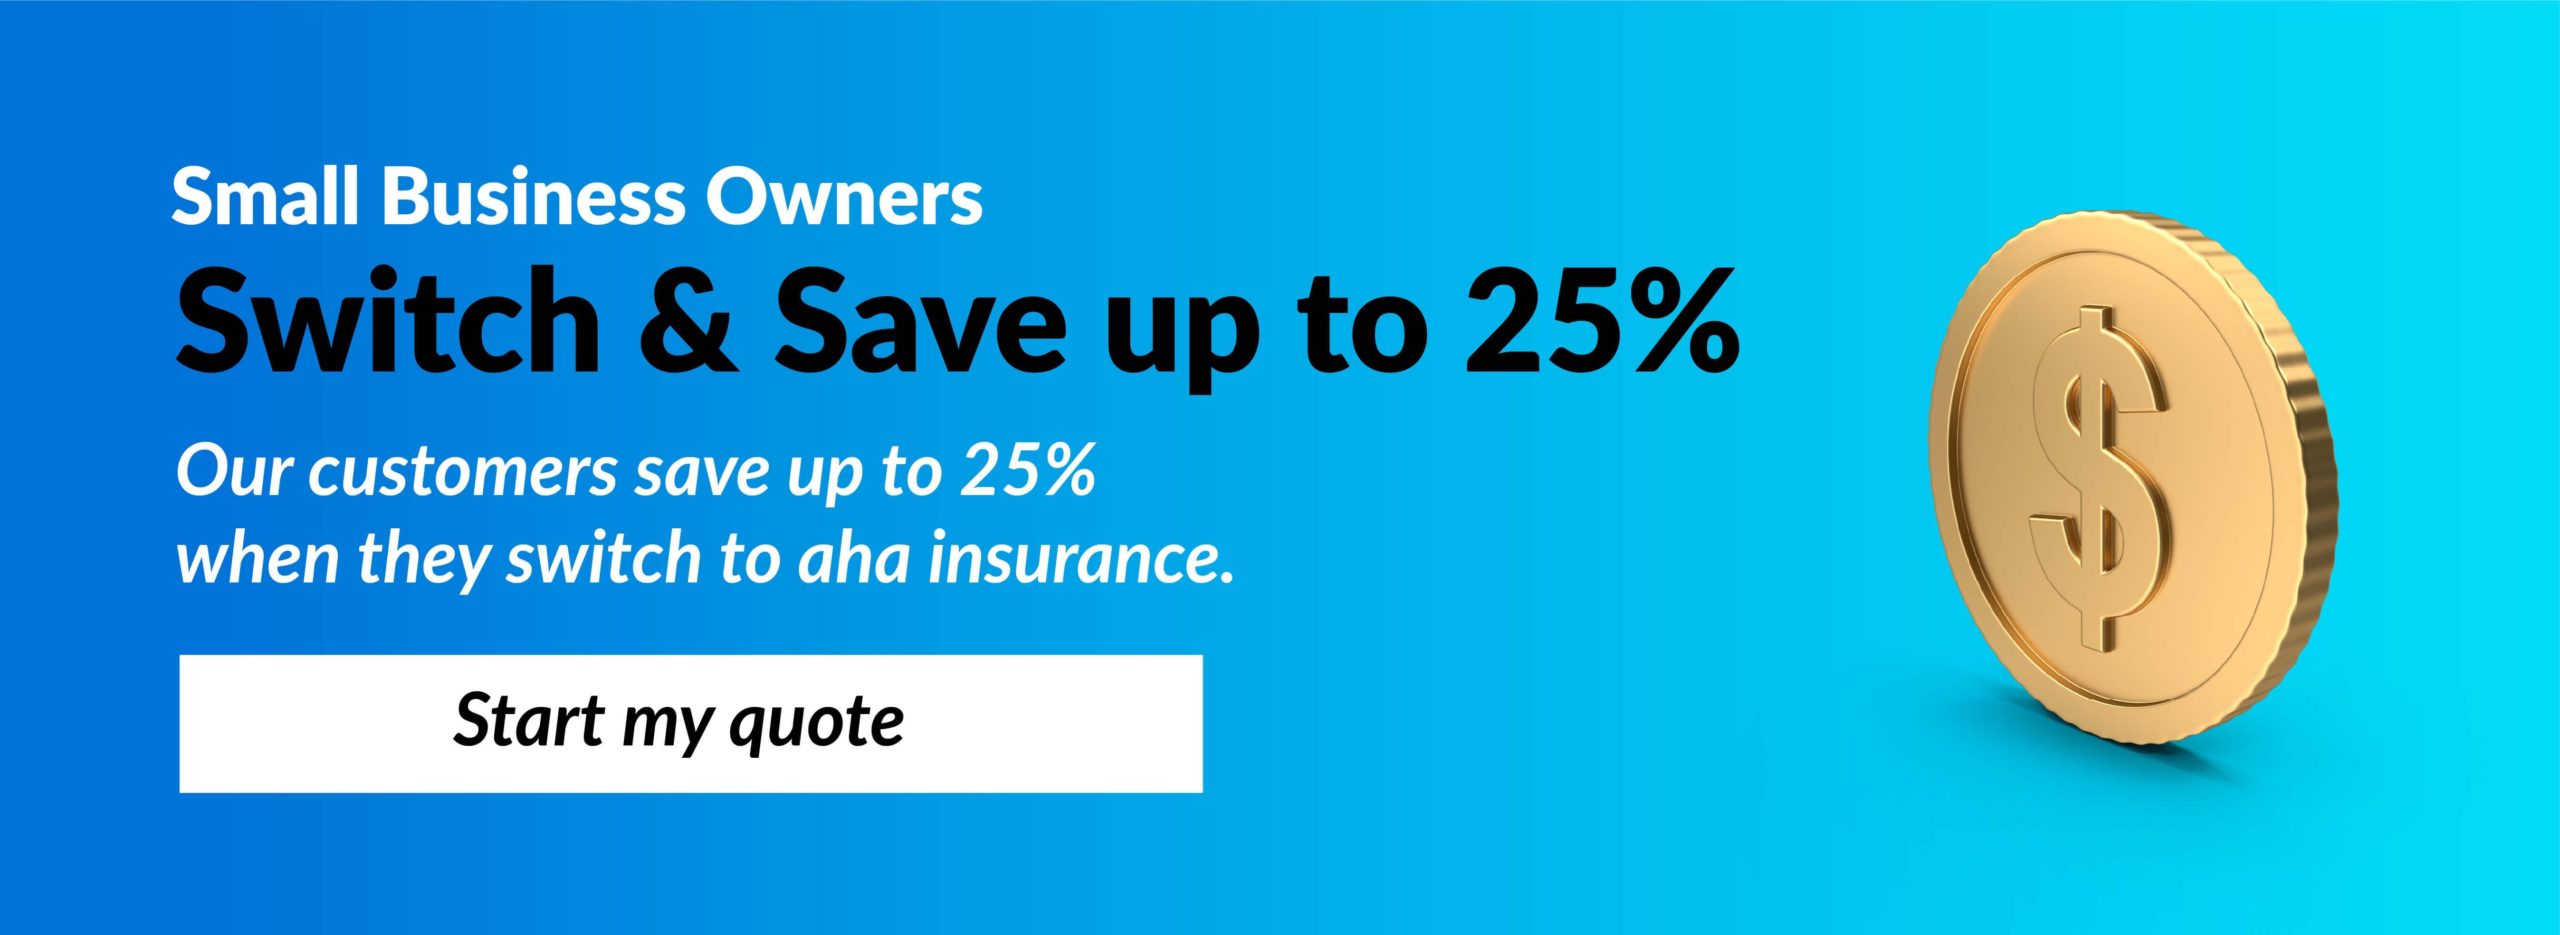 Small Business Owners - Switch & Save up to 25% - Our customers save up to 25% when they switch to aha insurance. Start my quote